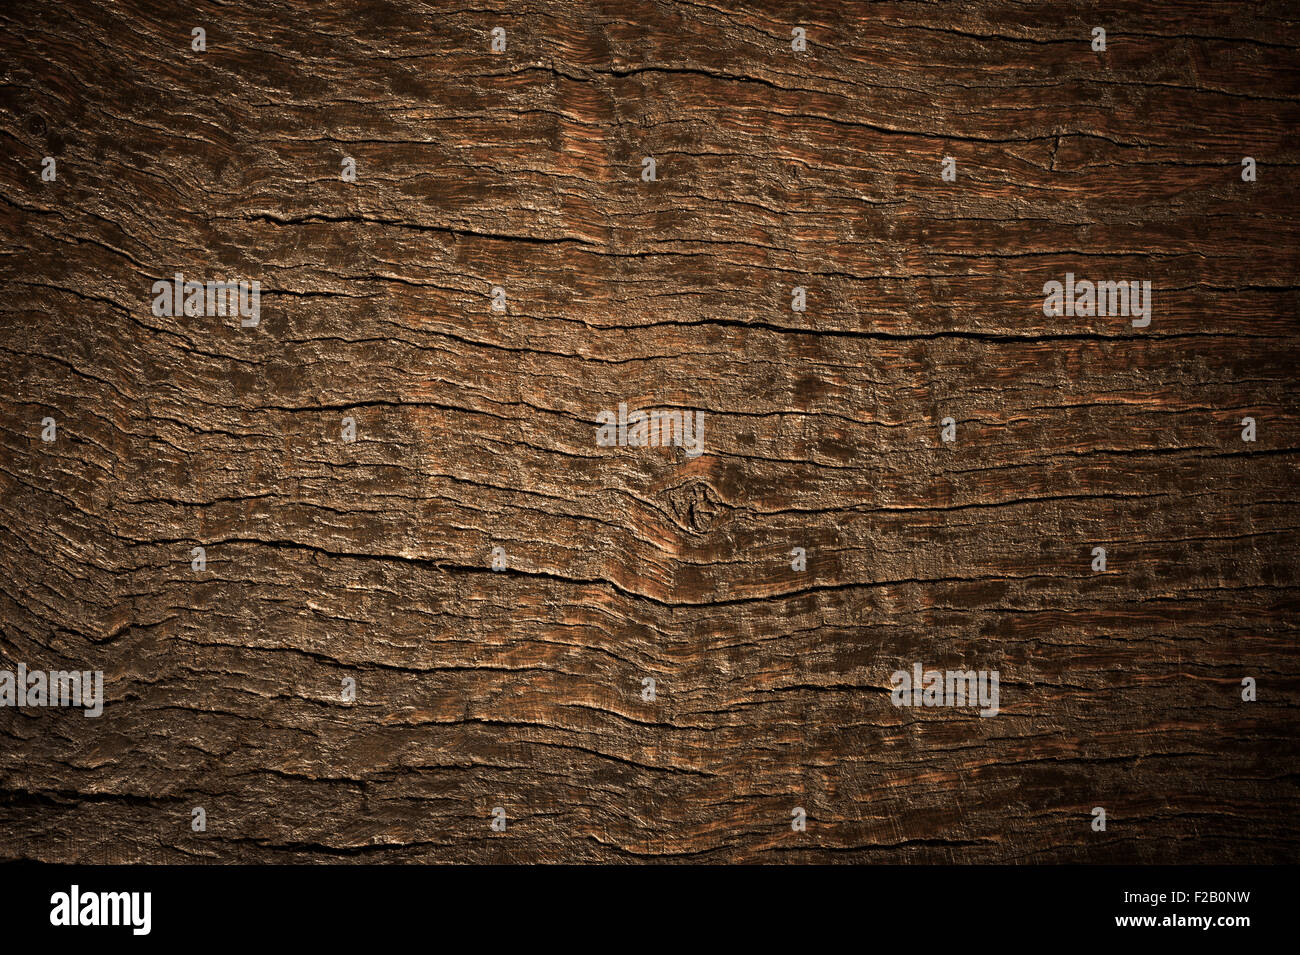 Dark wood texture for background use Stock Photo